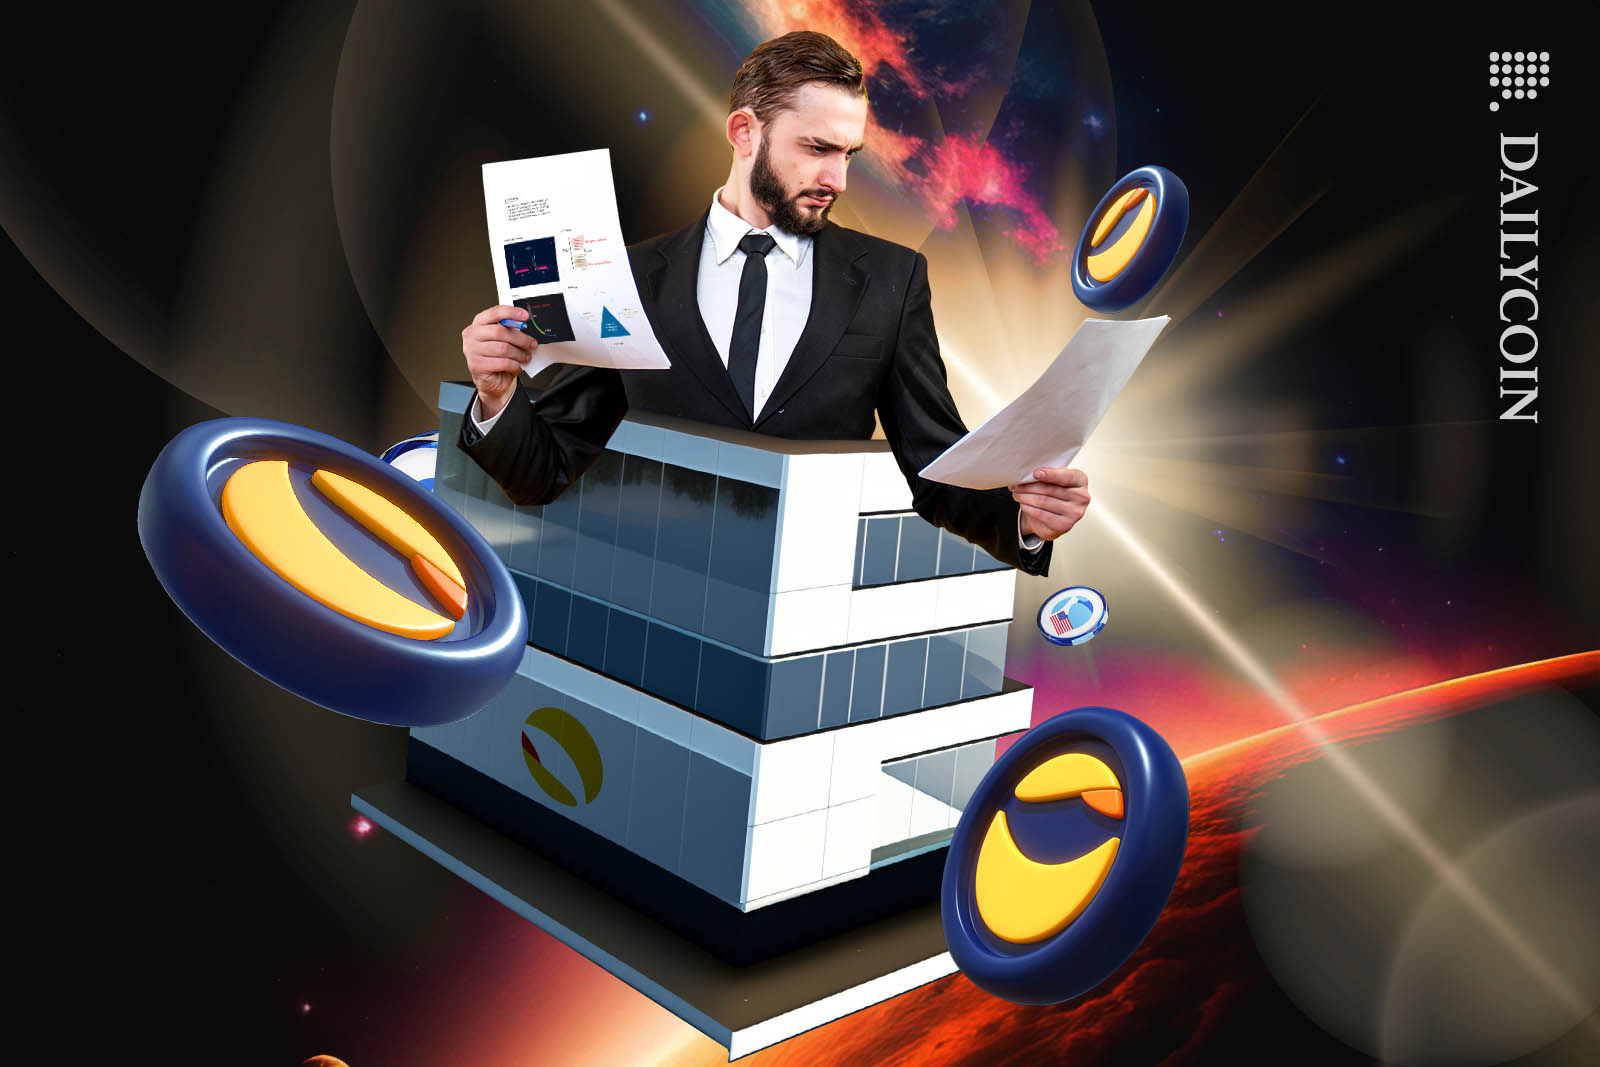 Man in suit emerging from an upside down house in space, reading a bunch of documents.